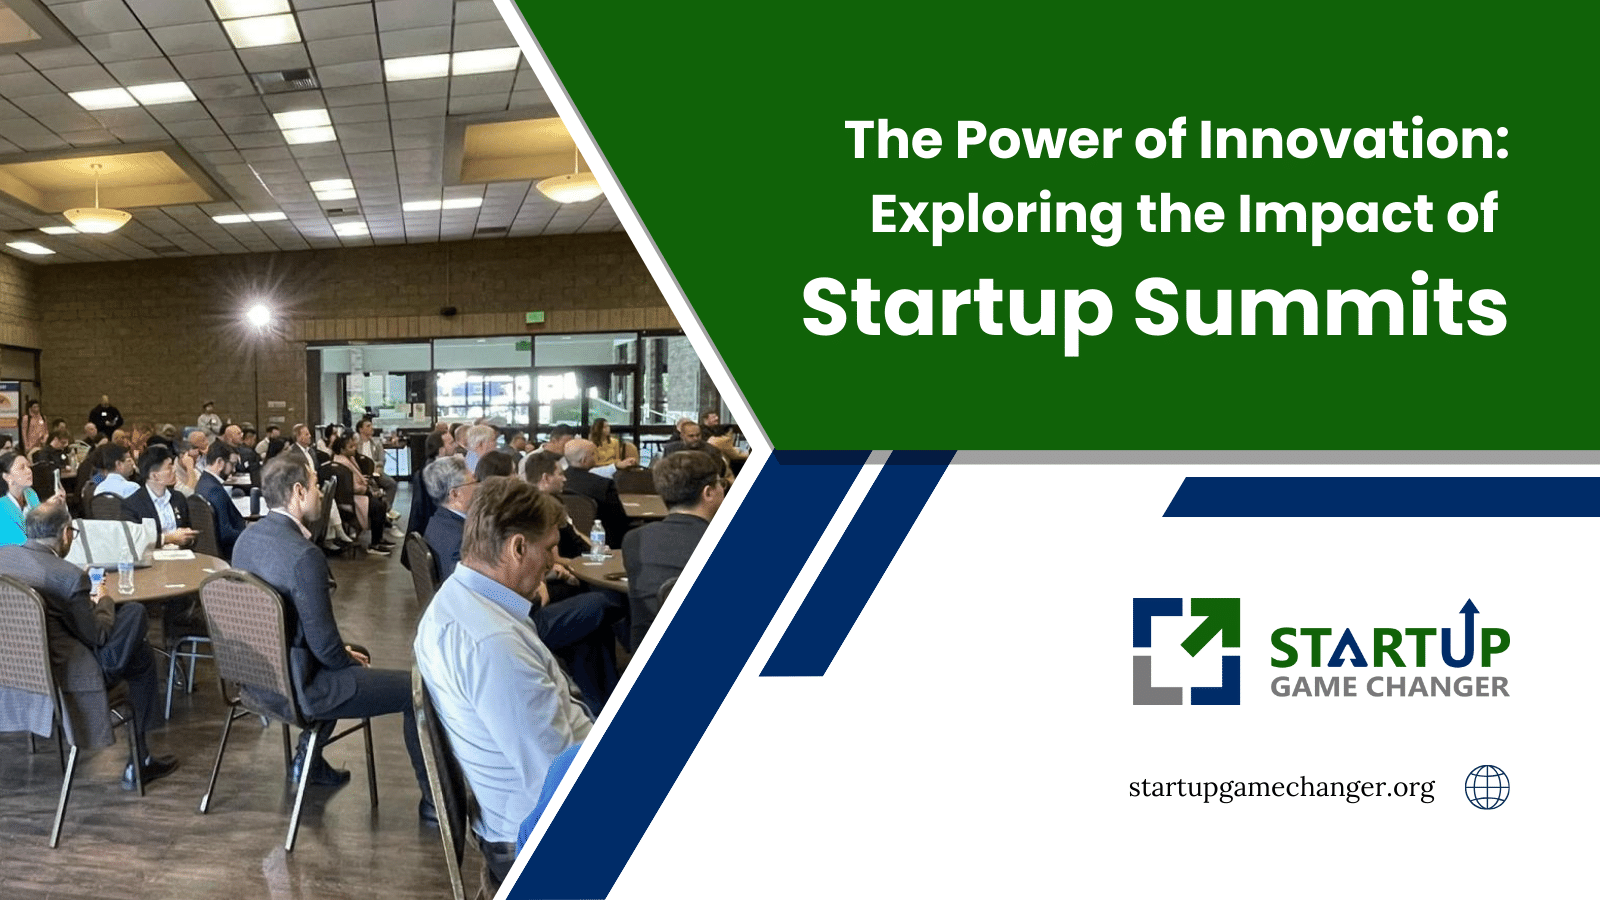 The Power of Innovation: Exploring the Impact of Startup Summits